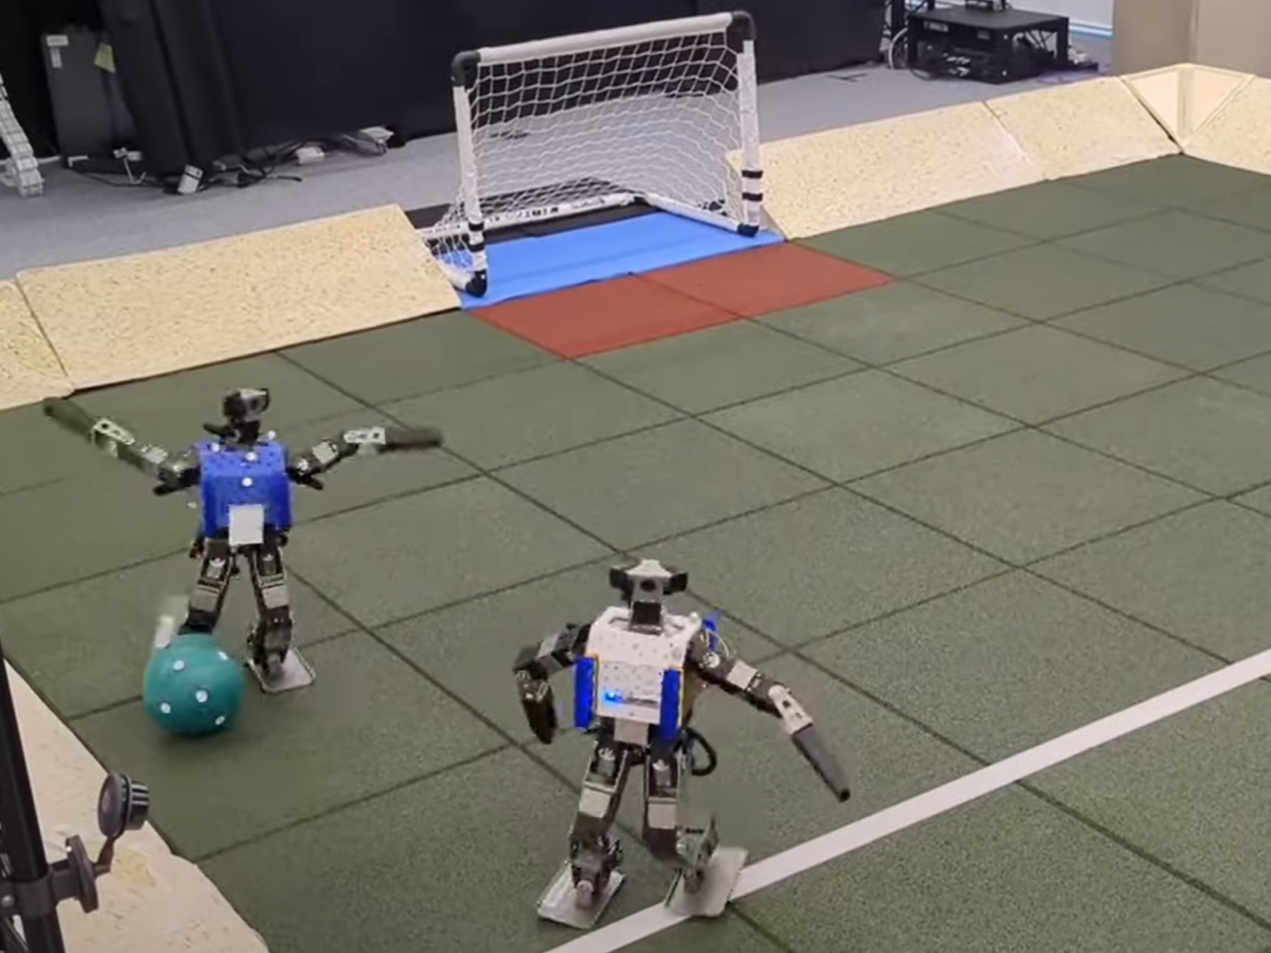 DeepMind’s AI-equipped robot footballers figured out defensive strategies like positioning themselves between the ball and the goal